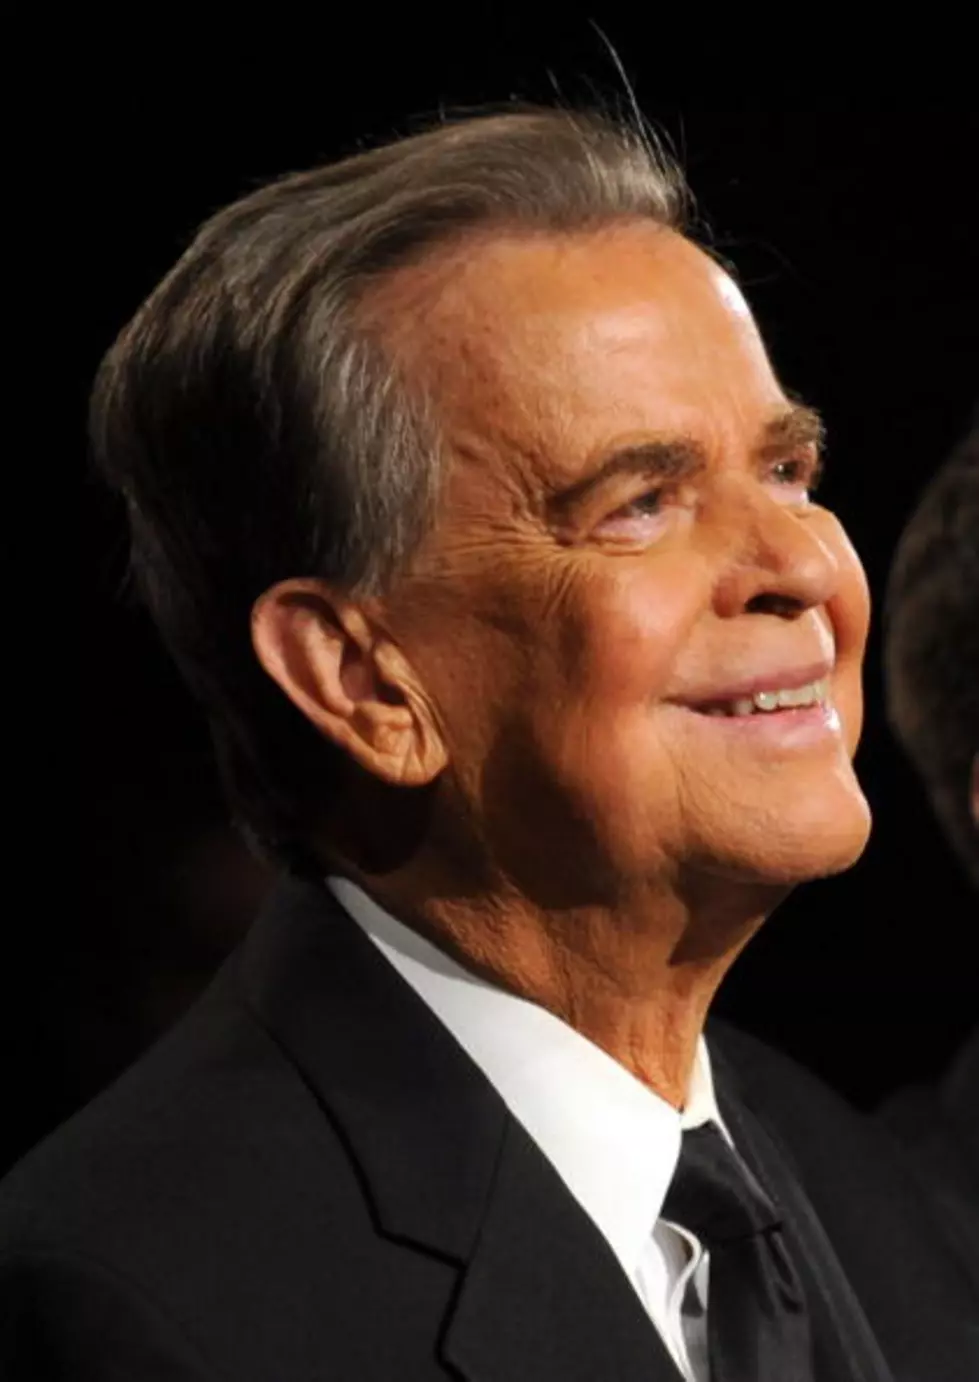 Utica Native Dick Clark Dies at 82 from Heart Attack